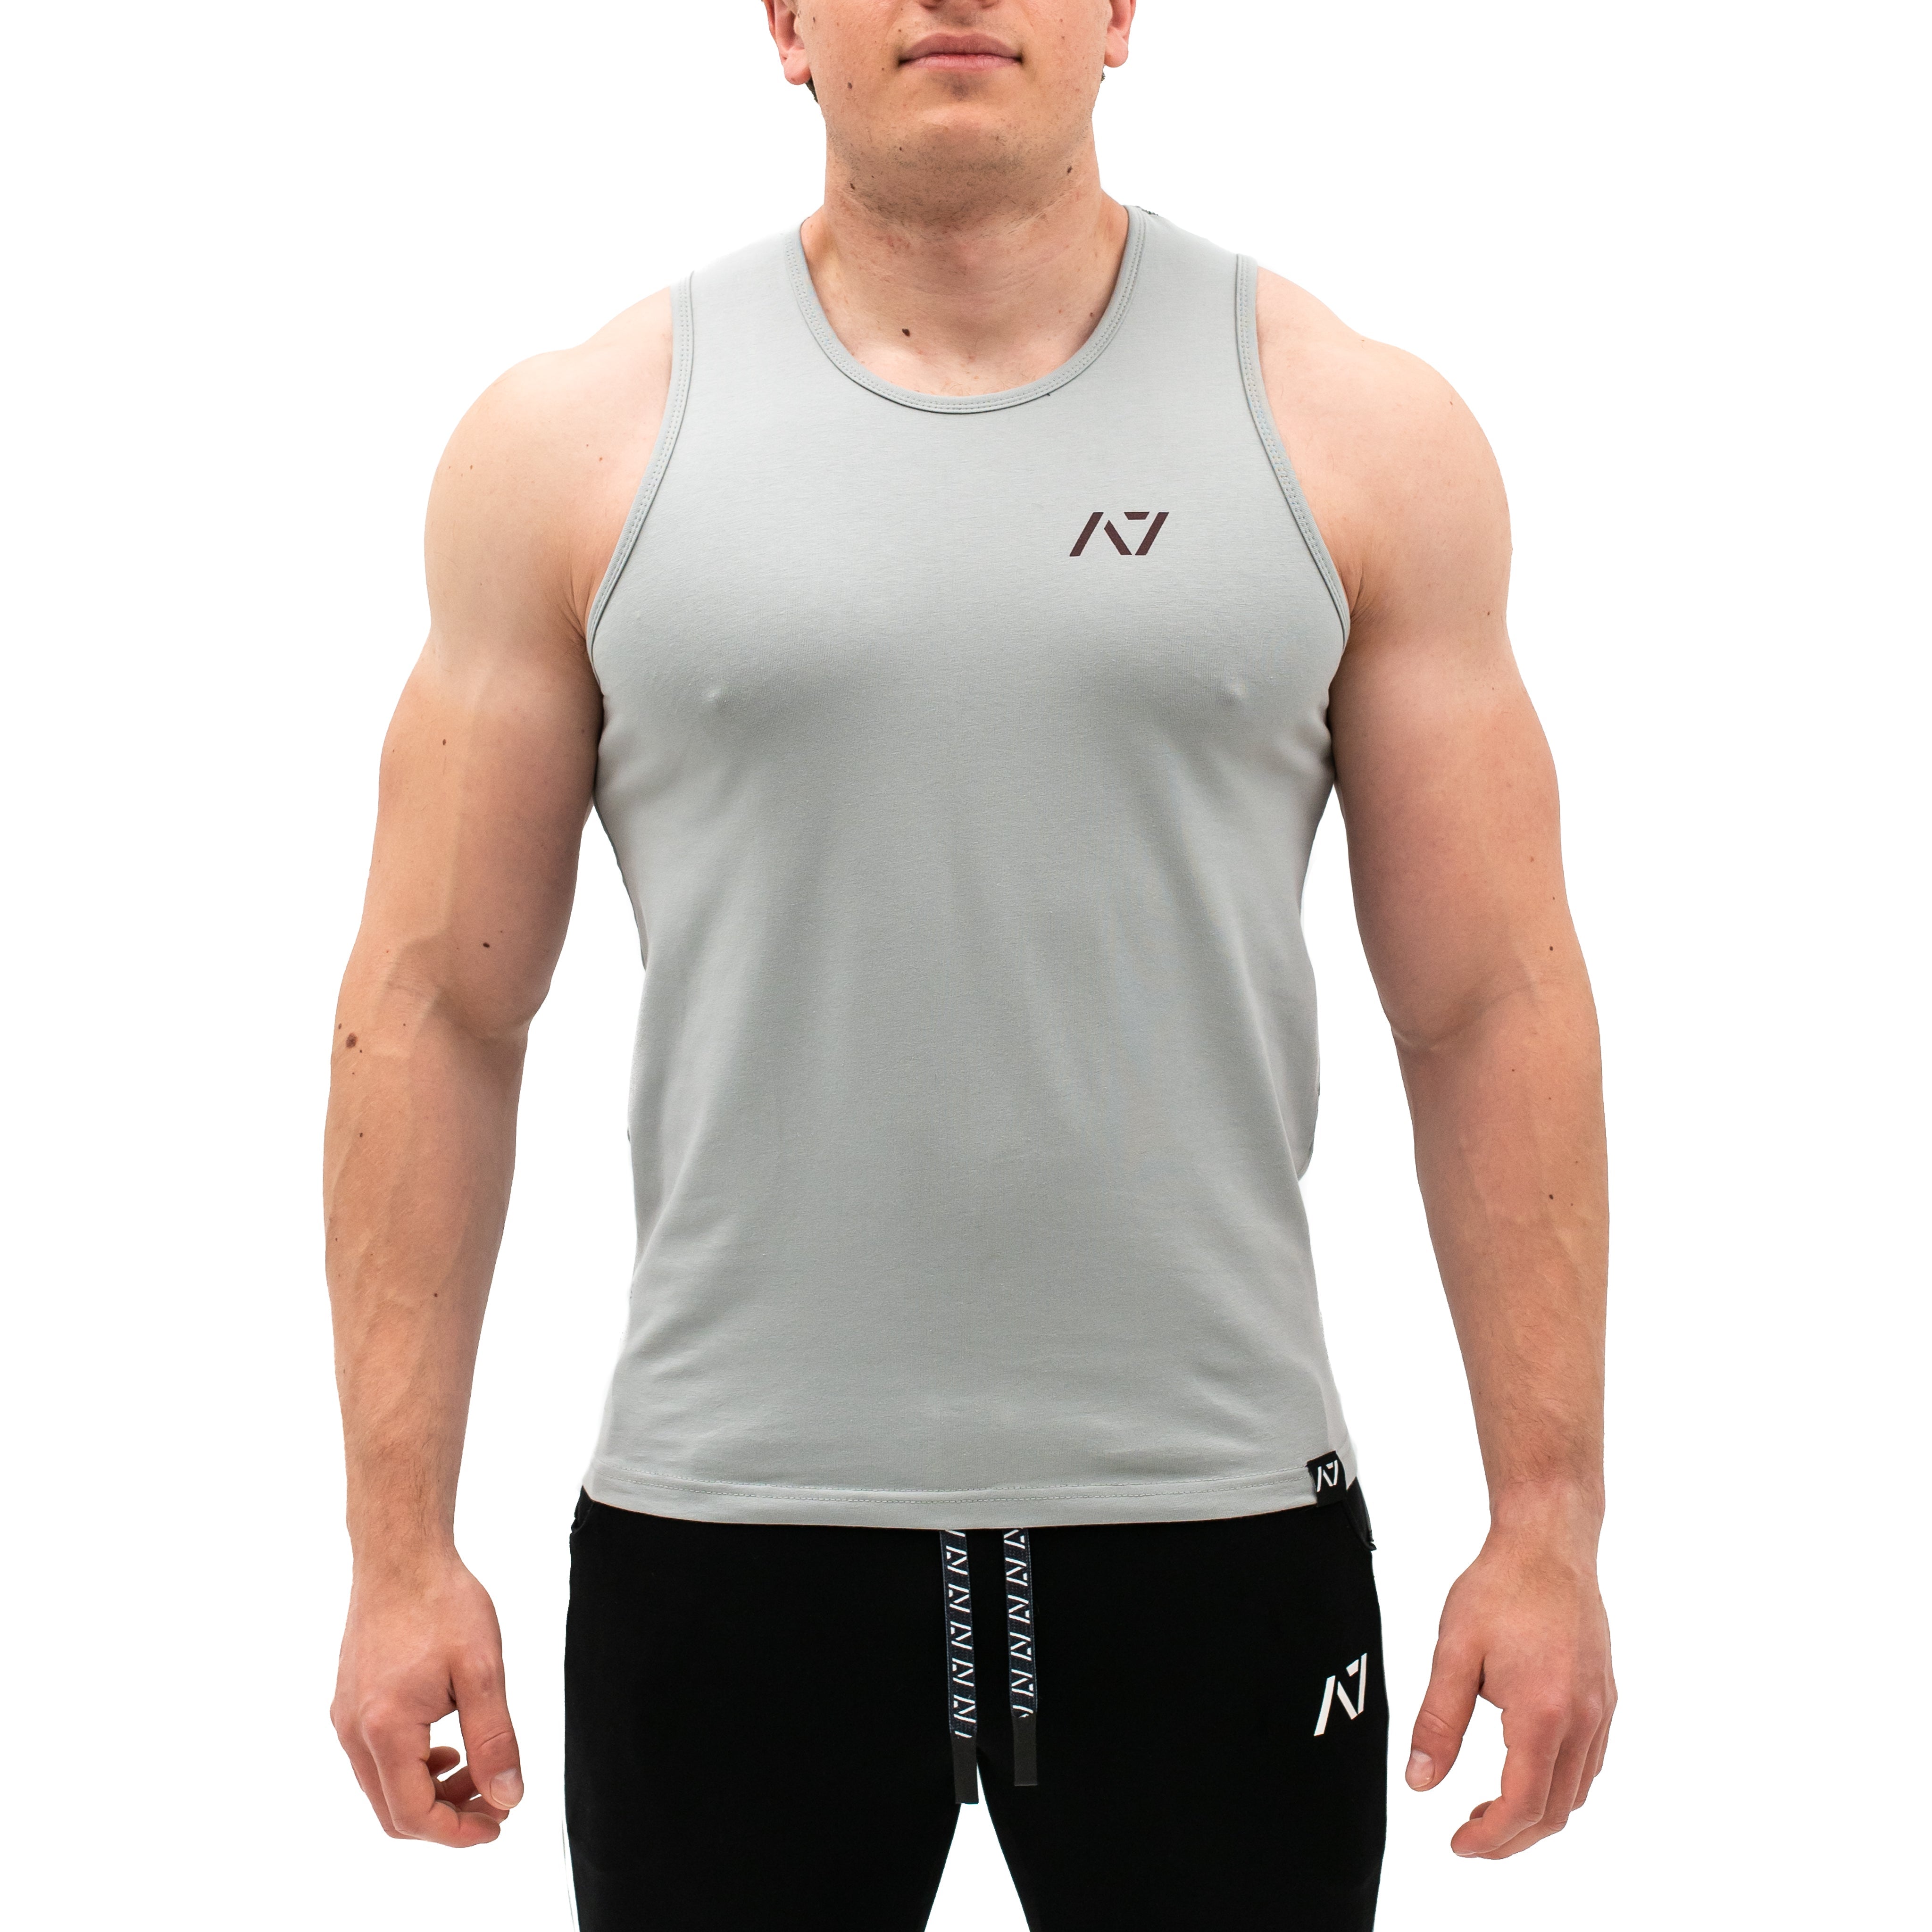 Bloodstone Bar Grip tank, great as a squat shirt. Purchase Bloodstone Bar Grip tank in UK from A7 UK. Purchase Bloodstone Bar Grip Tank in Europe from A7 Europe. No more chalk and no more sliding. Best Bar Grip Tshirts, shipping to UK and Europe from A7 UK. A7UK supplies the best Powerlifting apparel for all your workouts. Available in UK and Europe including France, Italy, Germany, the Netherlands, Sweden and Poland.